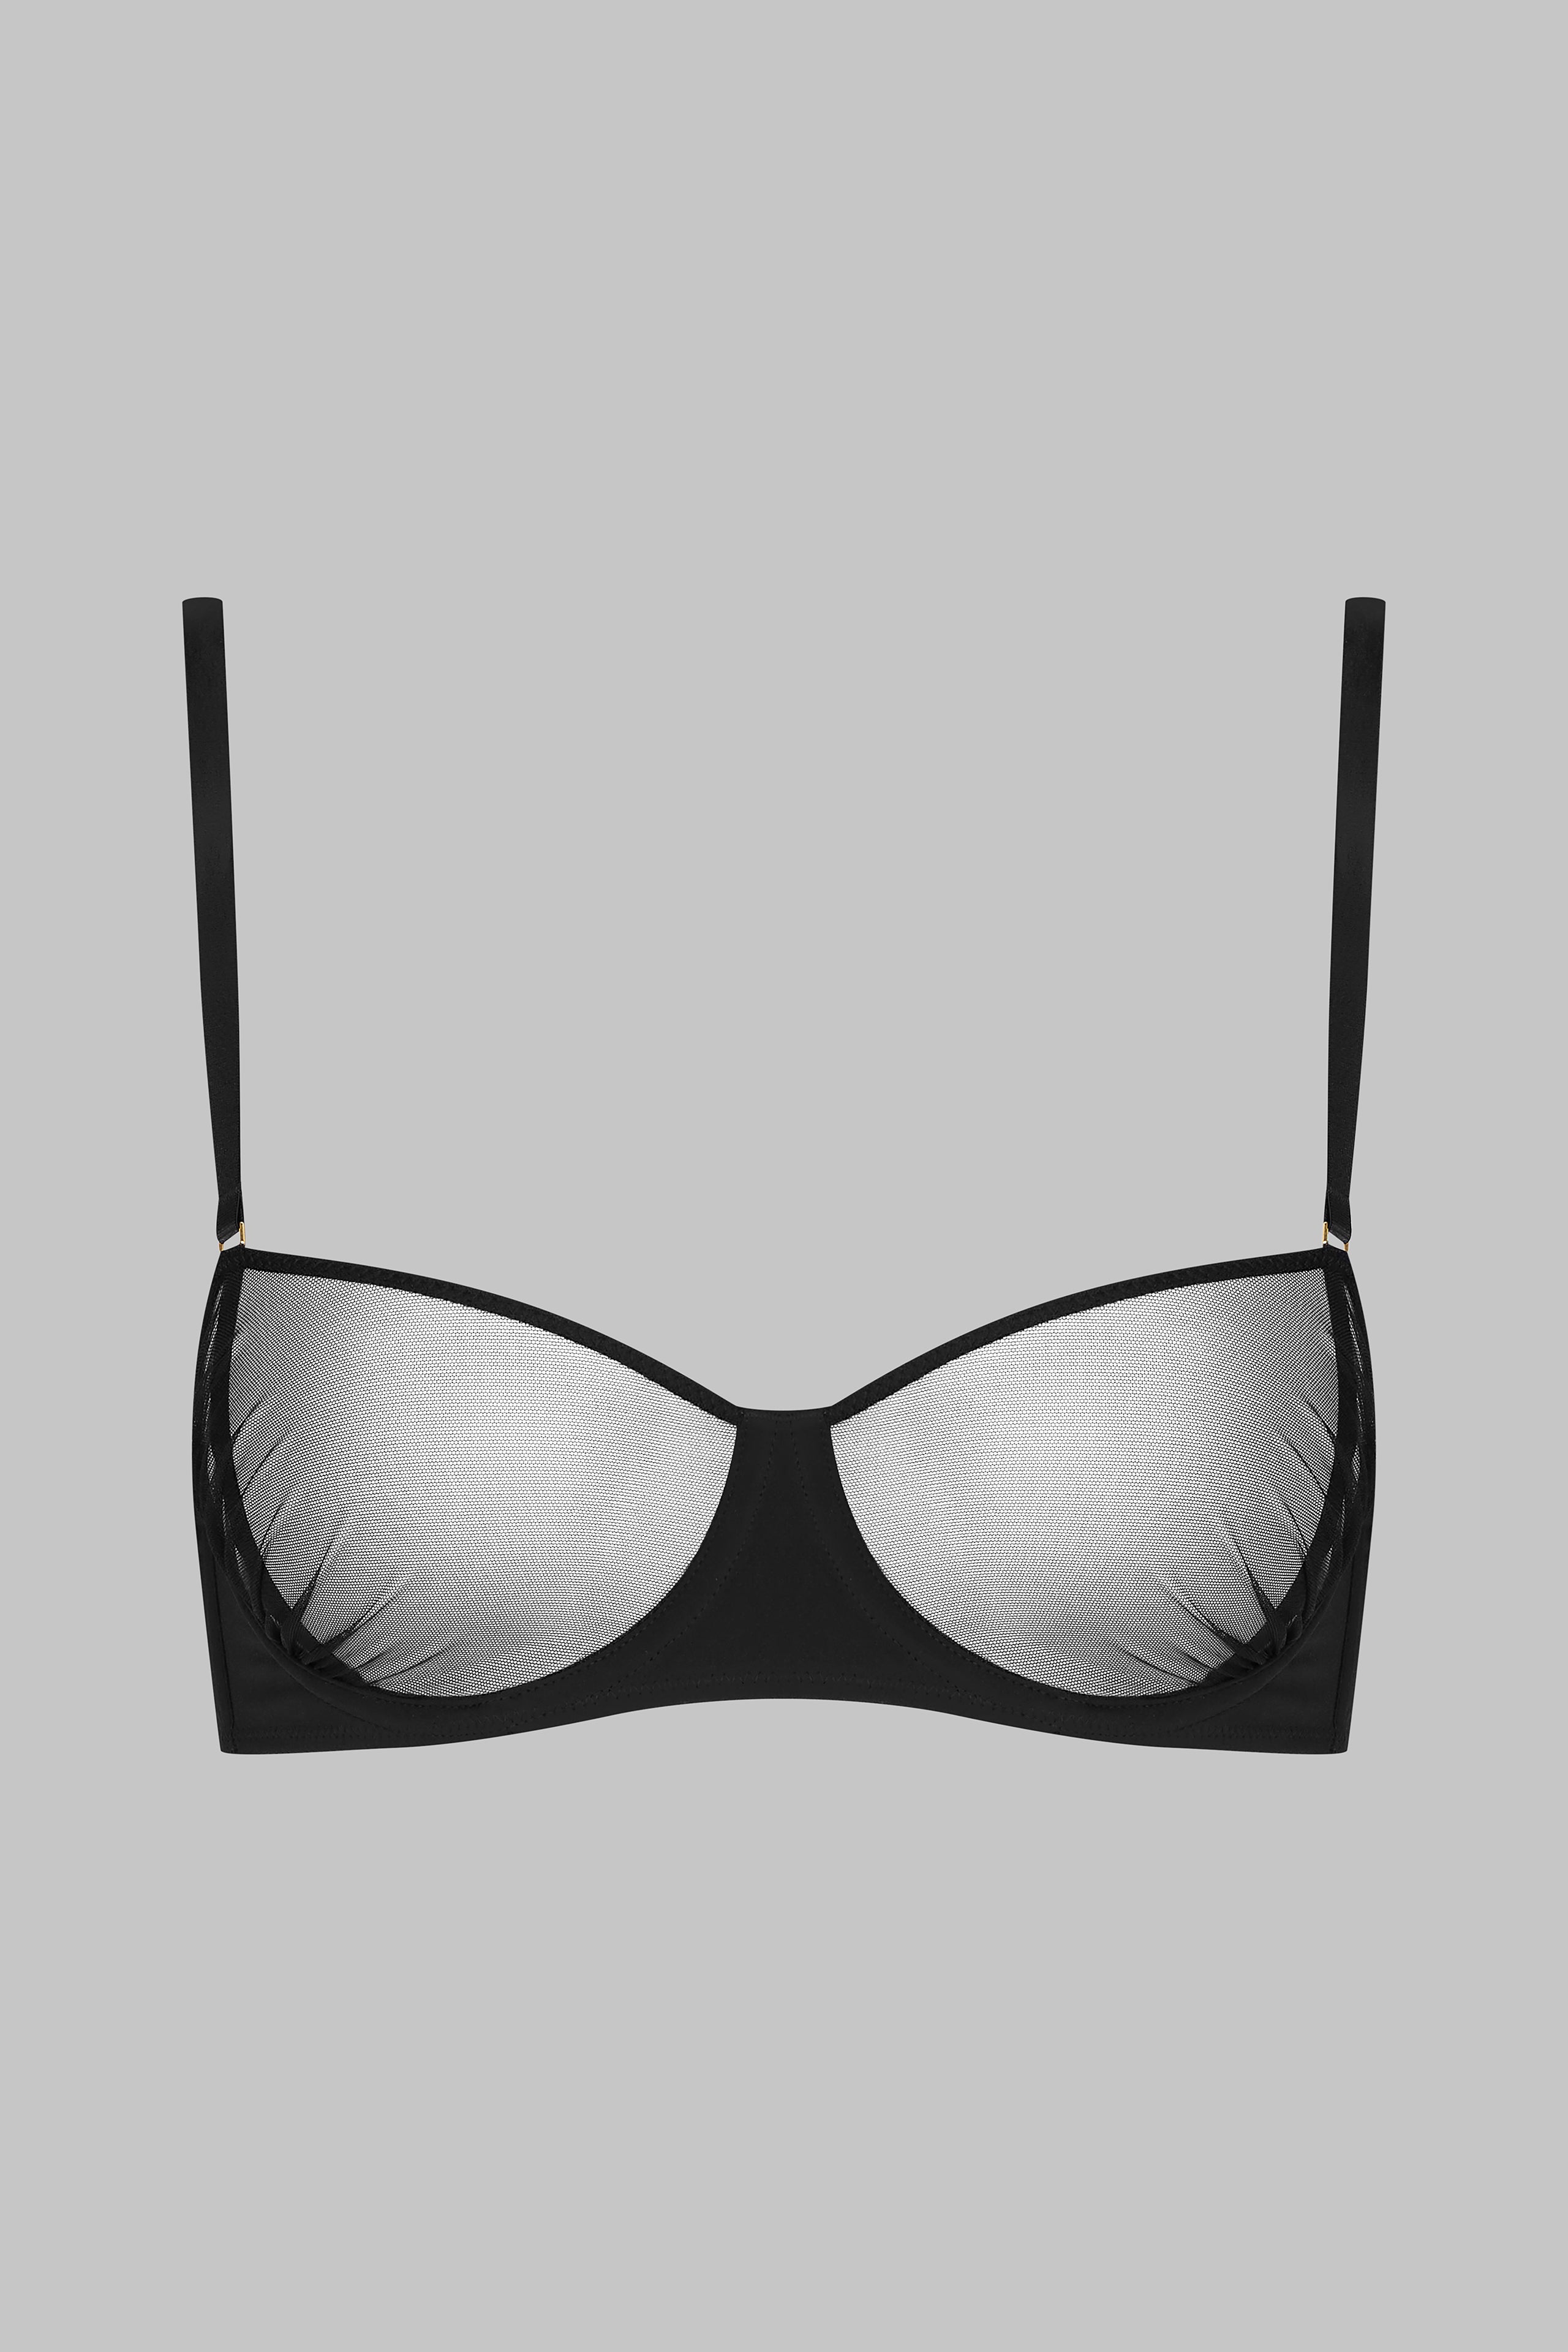 Fawn Crystal Bra - Black - House of Tinks